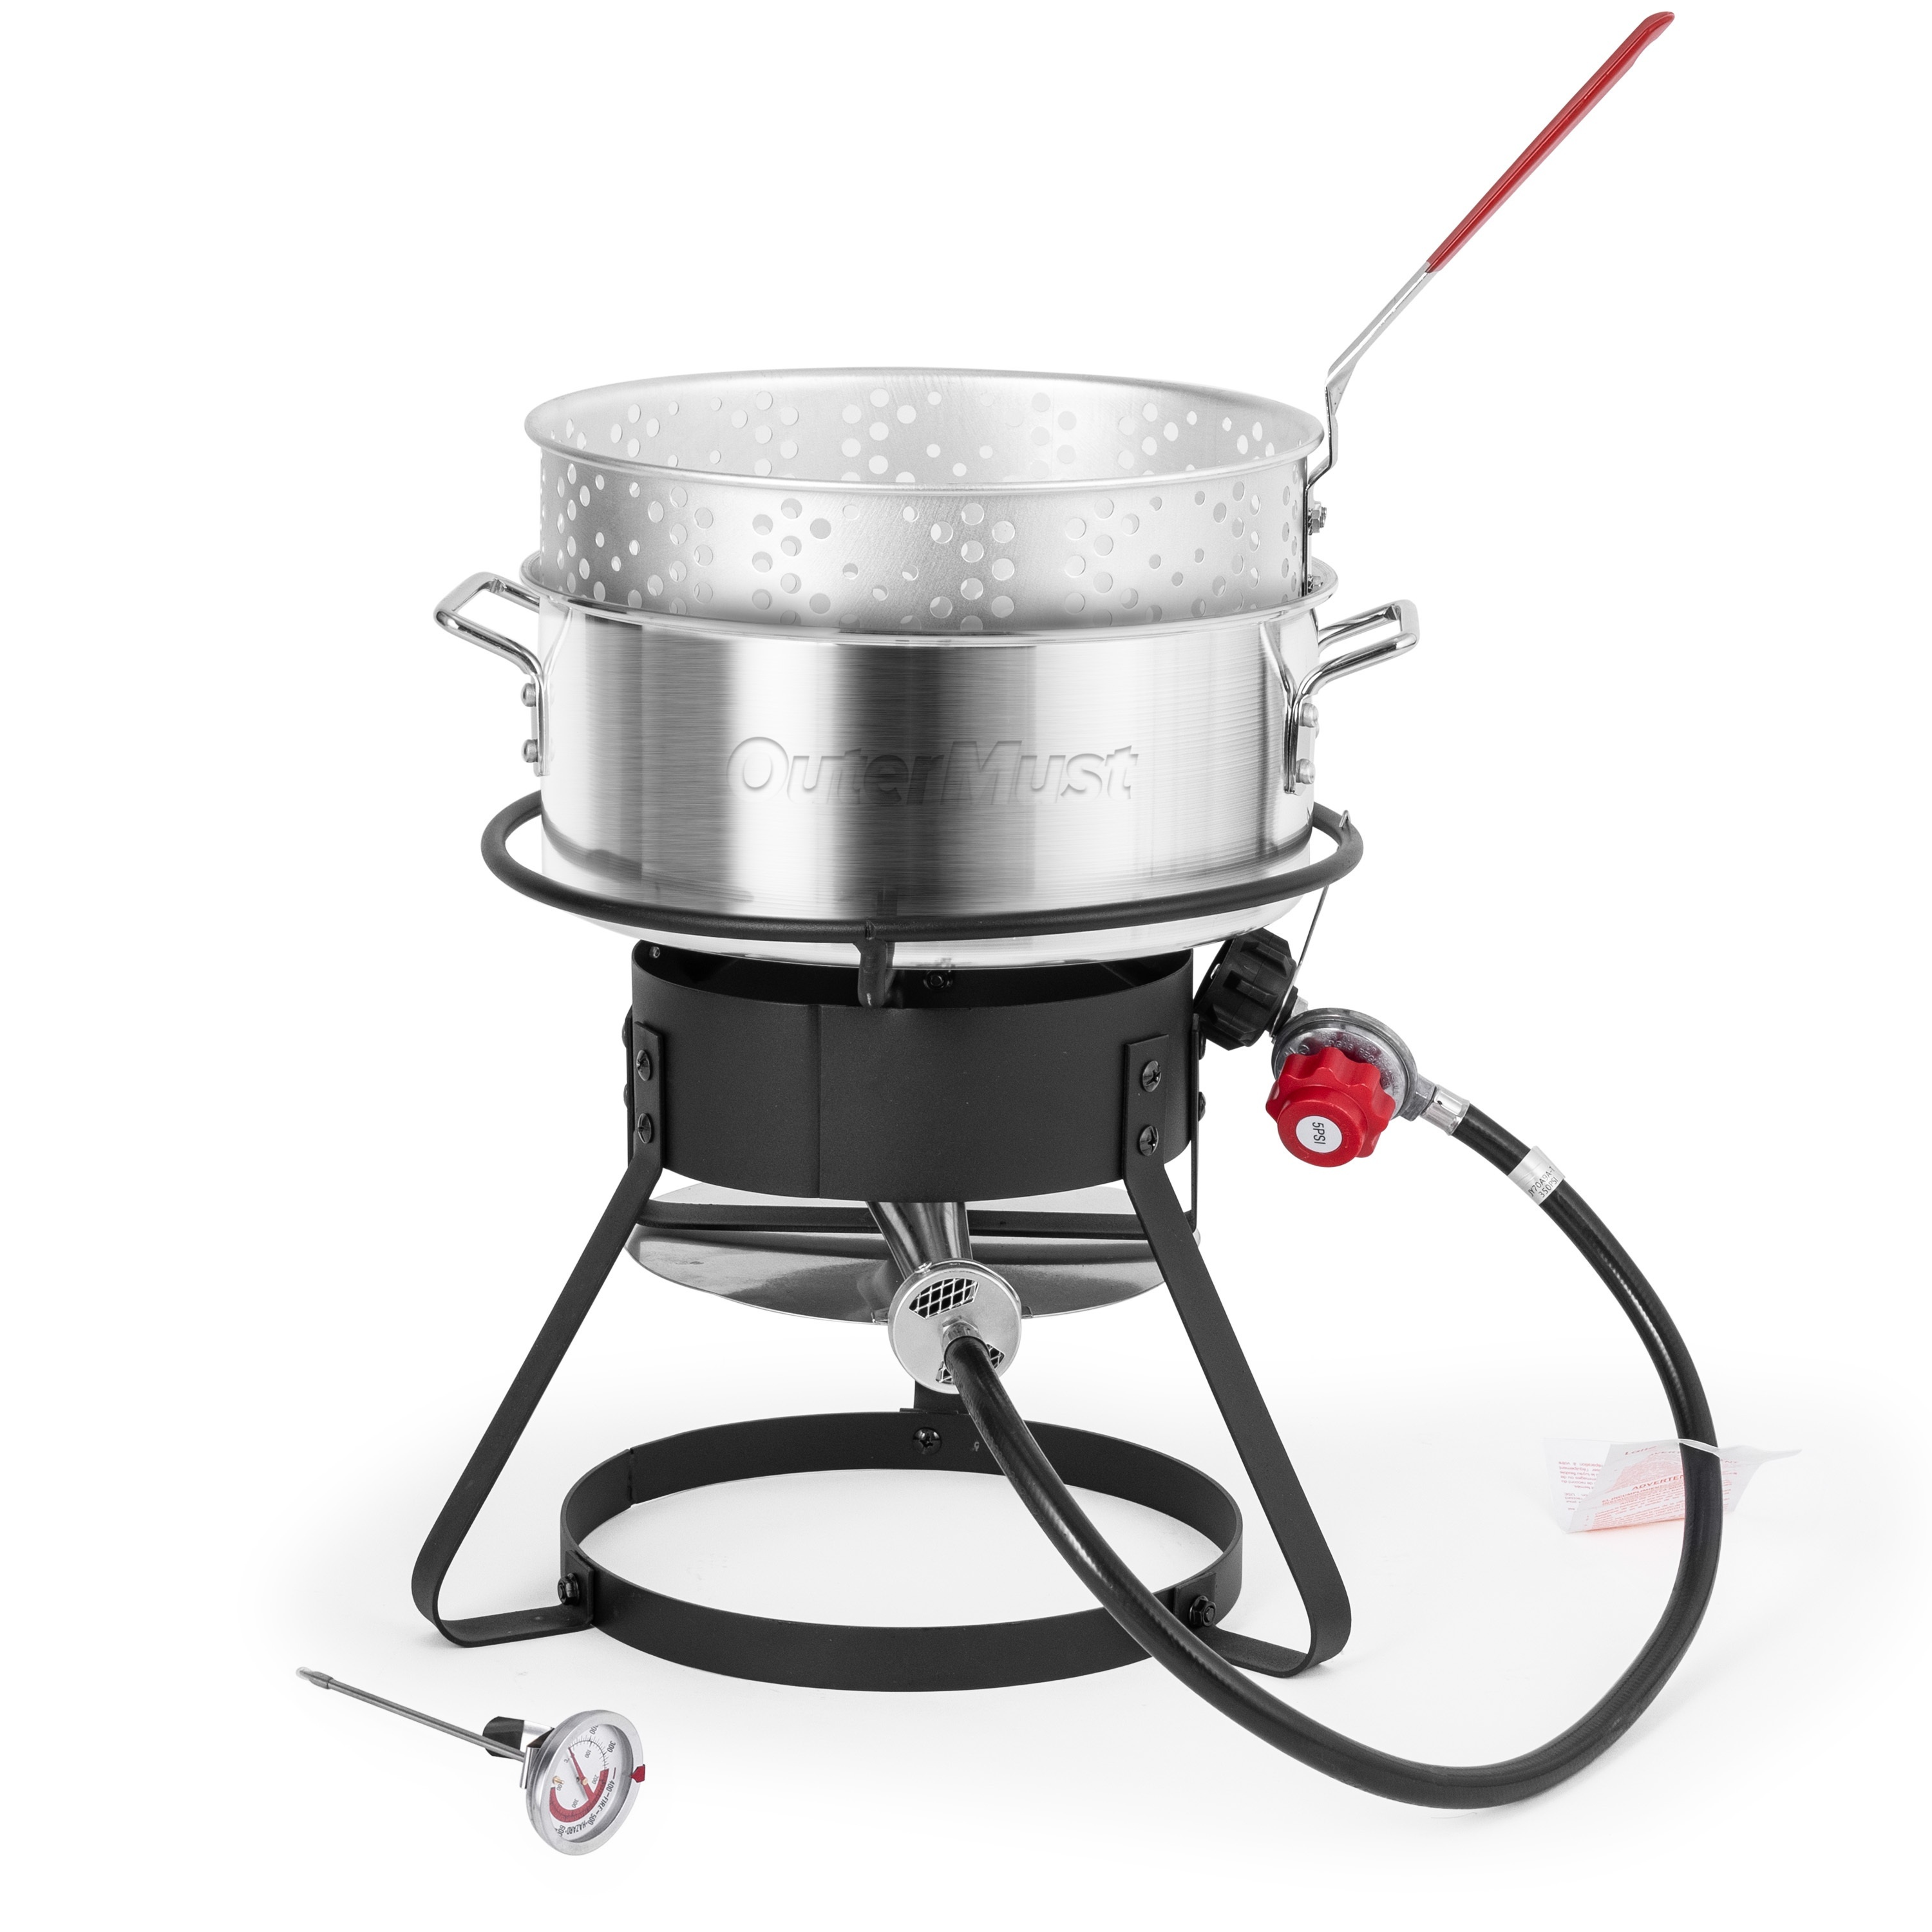 

Fish Fryer Pot And Basket, 58000 Btu 11 Qt. Aluminum Outdoor Deep Fry Pot With Basket And 5 Inches Thermometer For Frying Fish, French Fries